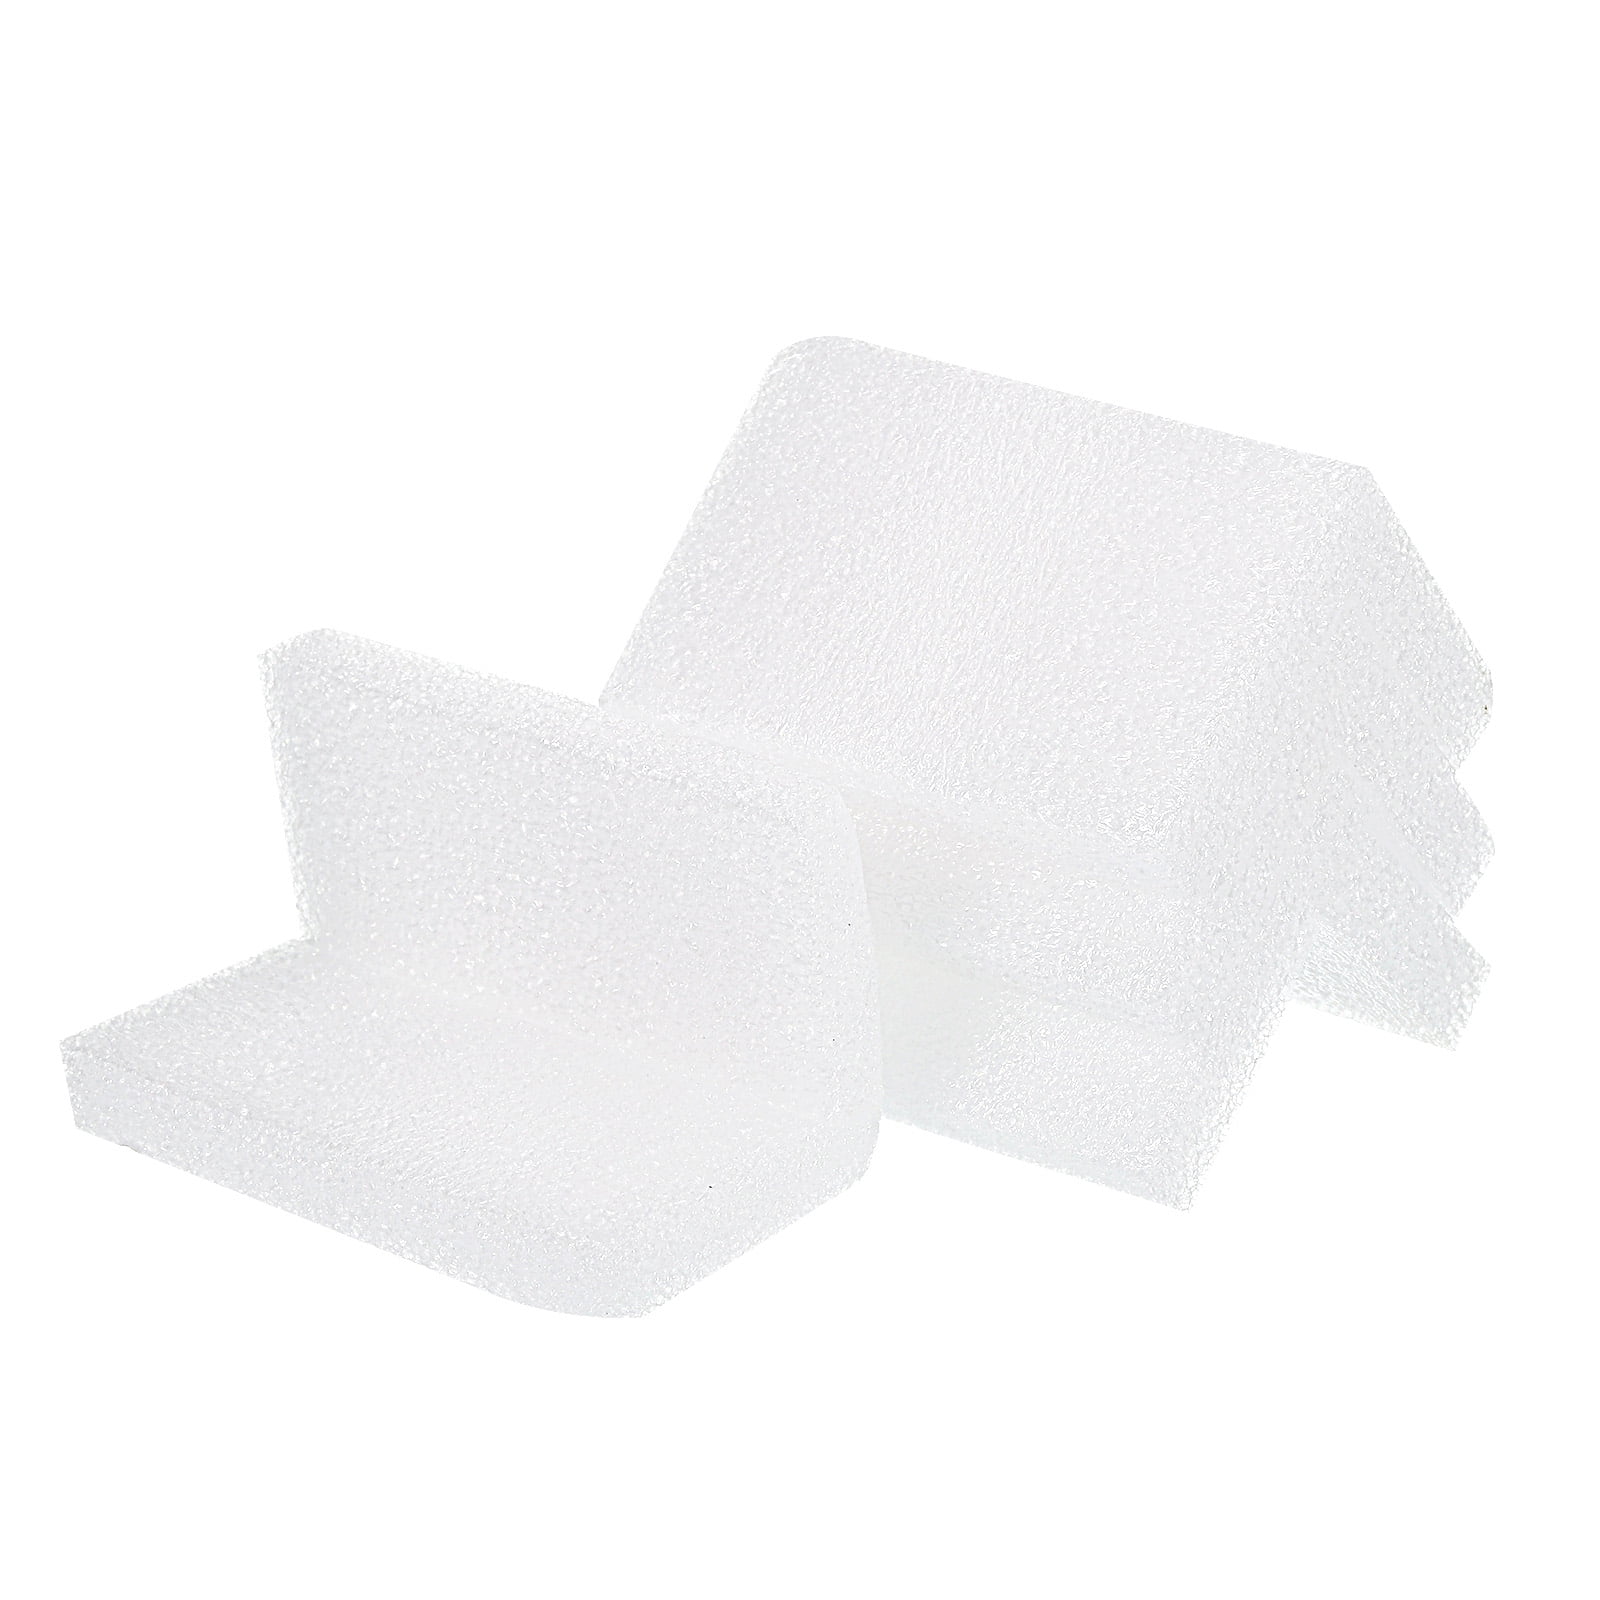 Baby Proofing Edge Protector for Baby, Extra Wide 0.6inch Corner